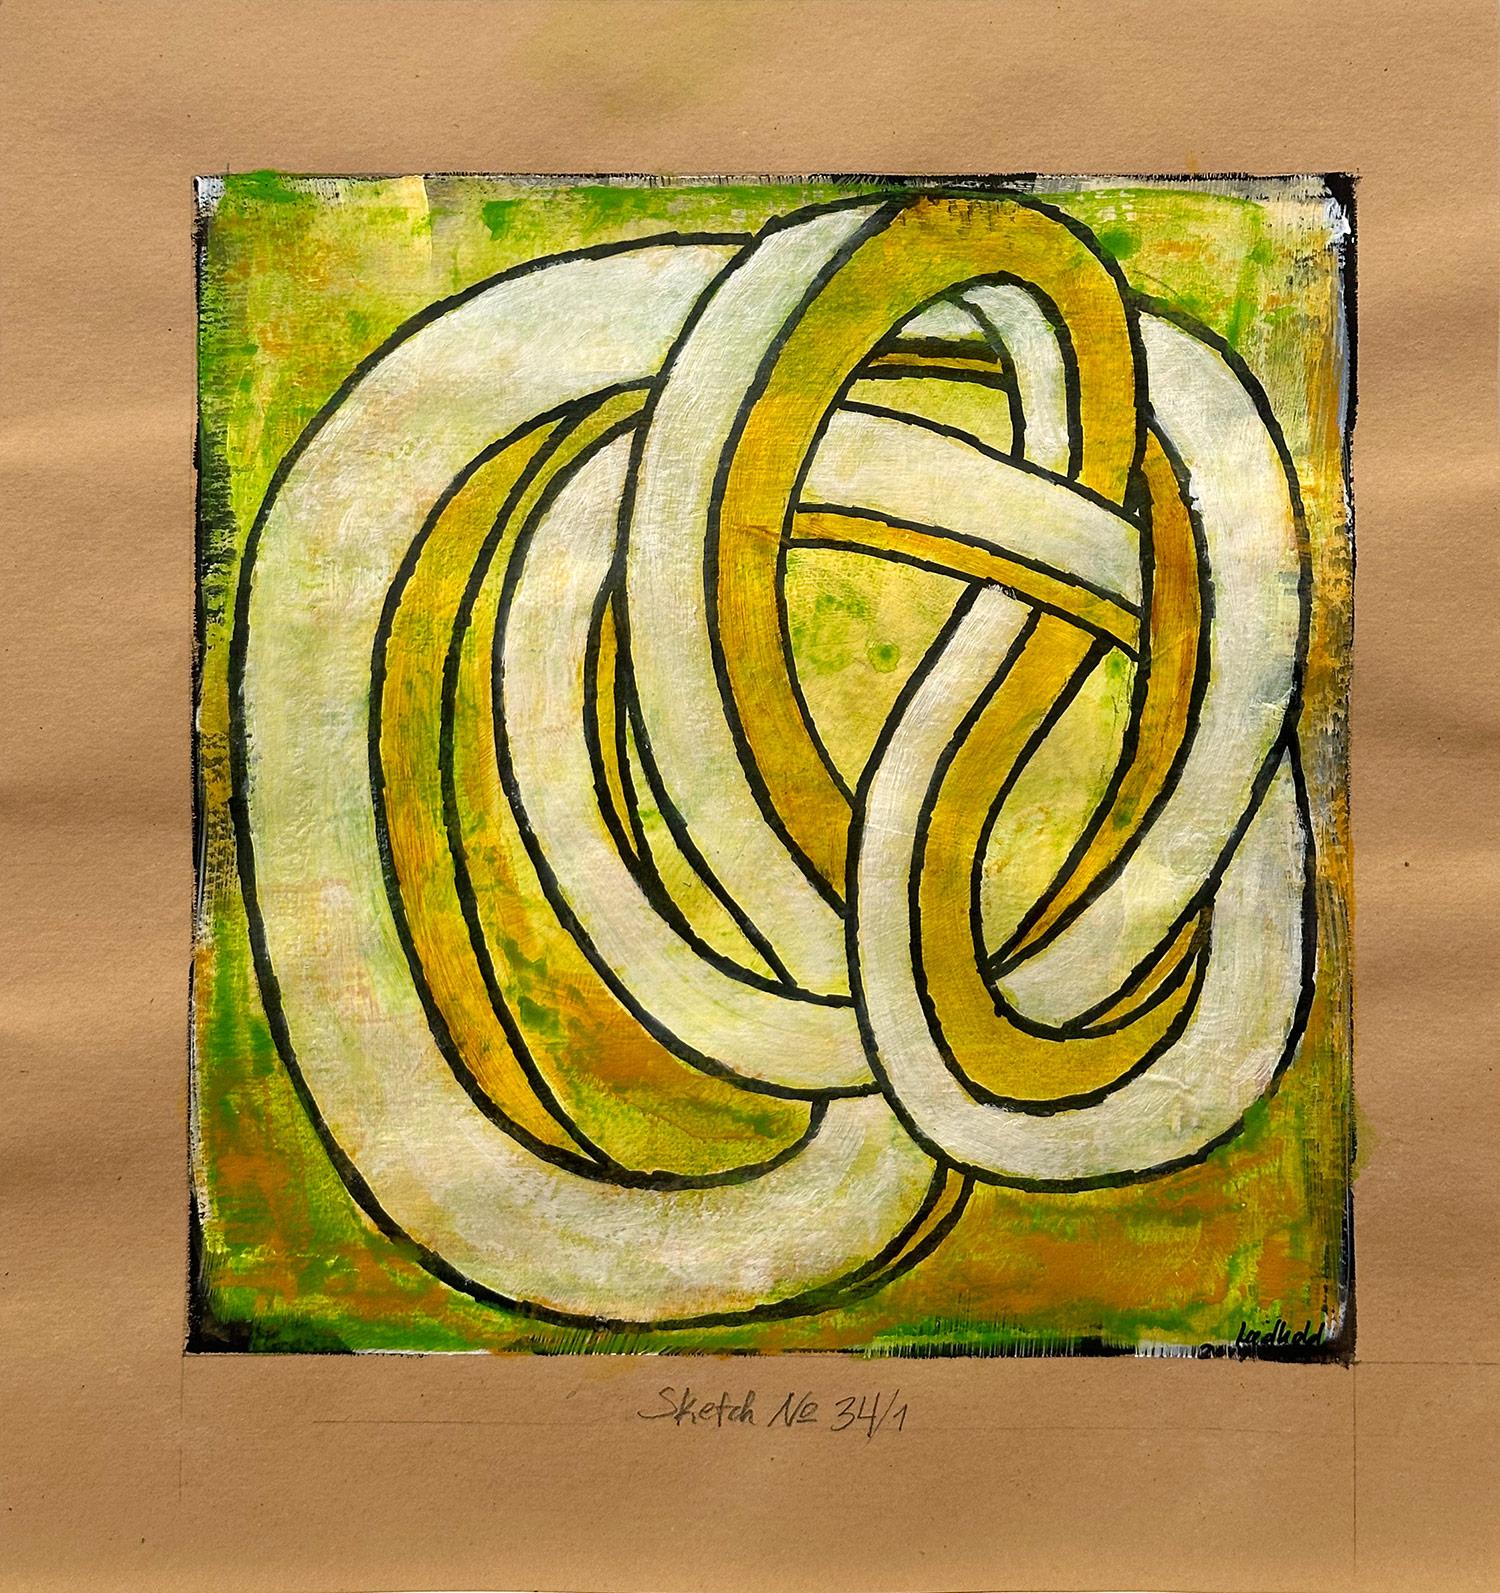 "Sketch No.34/1" Abstract Representational Kinetic Knot Painting Work on Paper